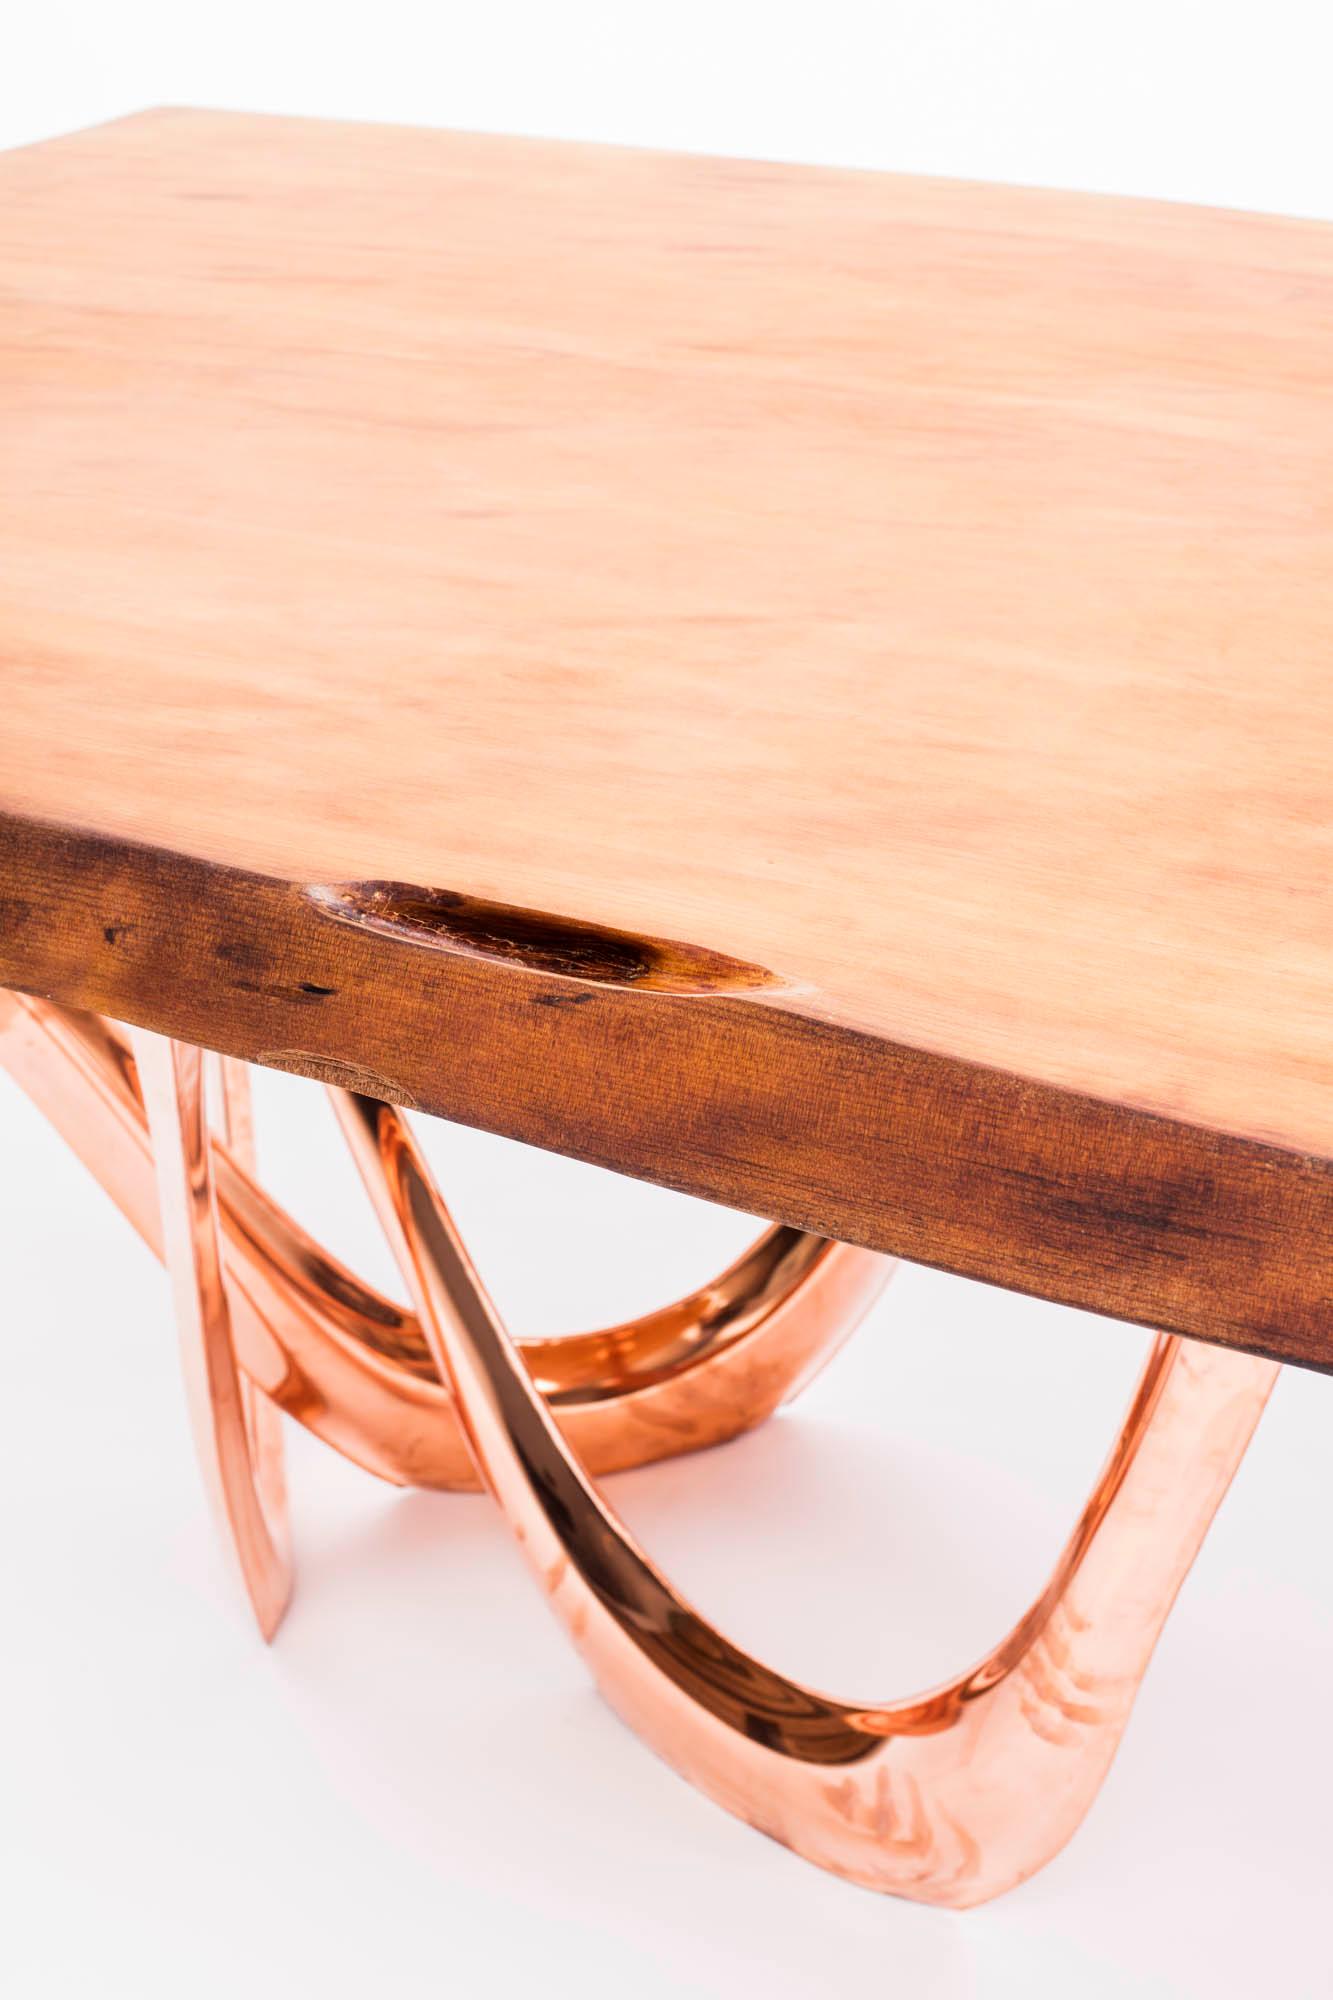 G-Table CU+K in Copper-Cladded Steel with Kauri Wood Top by Zieta For Sale 1